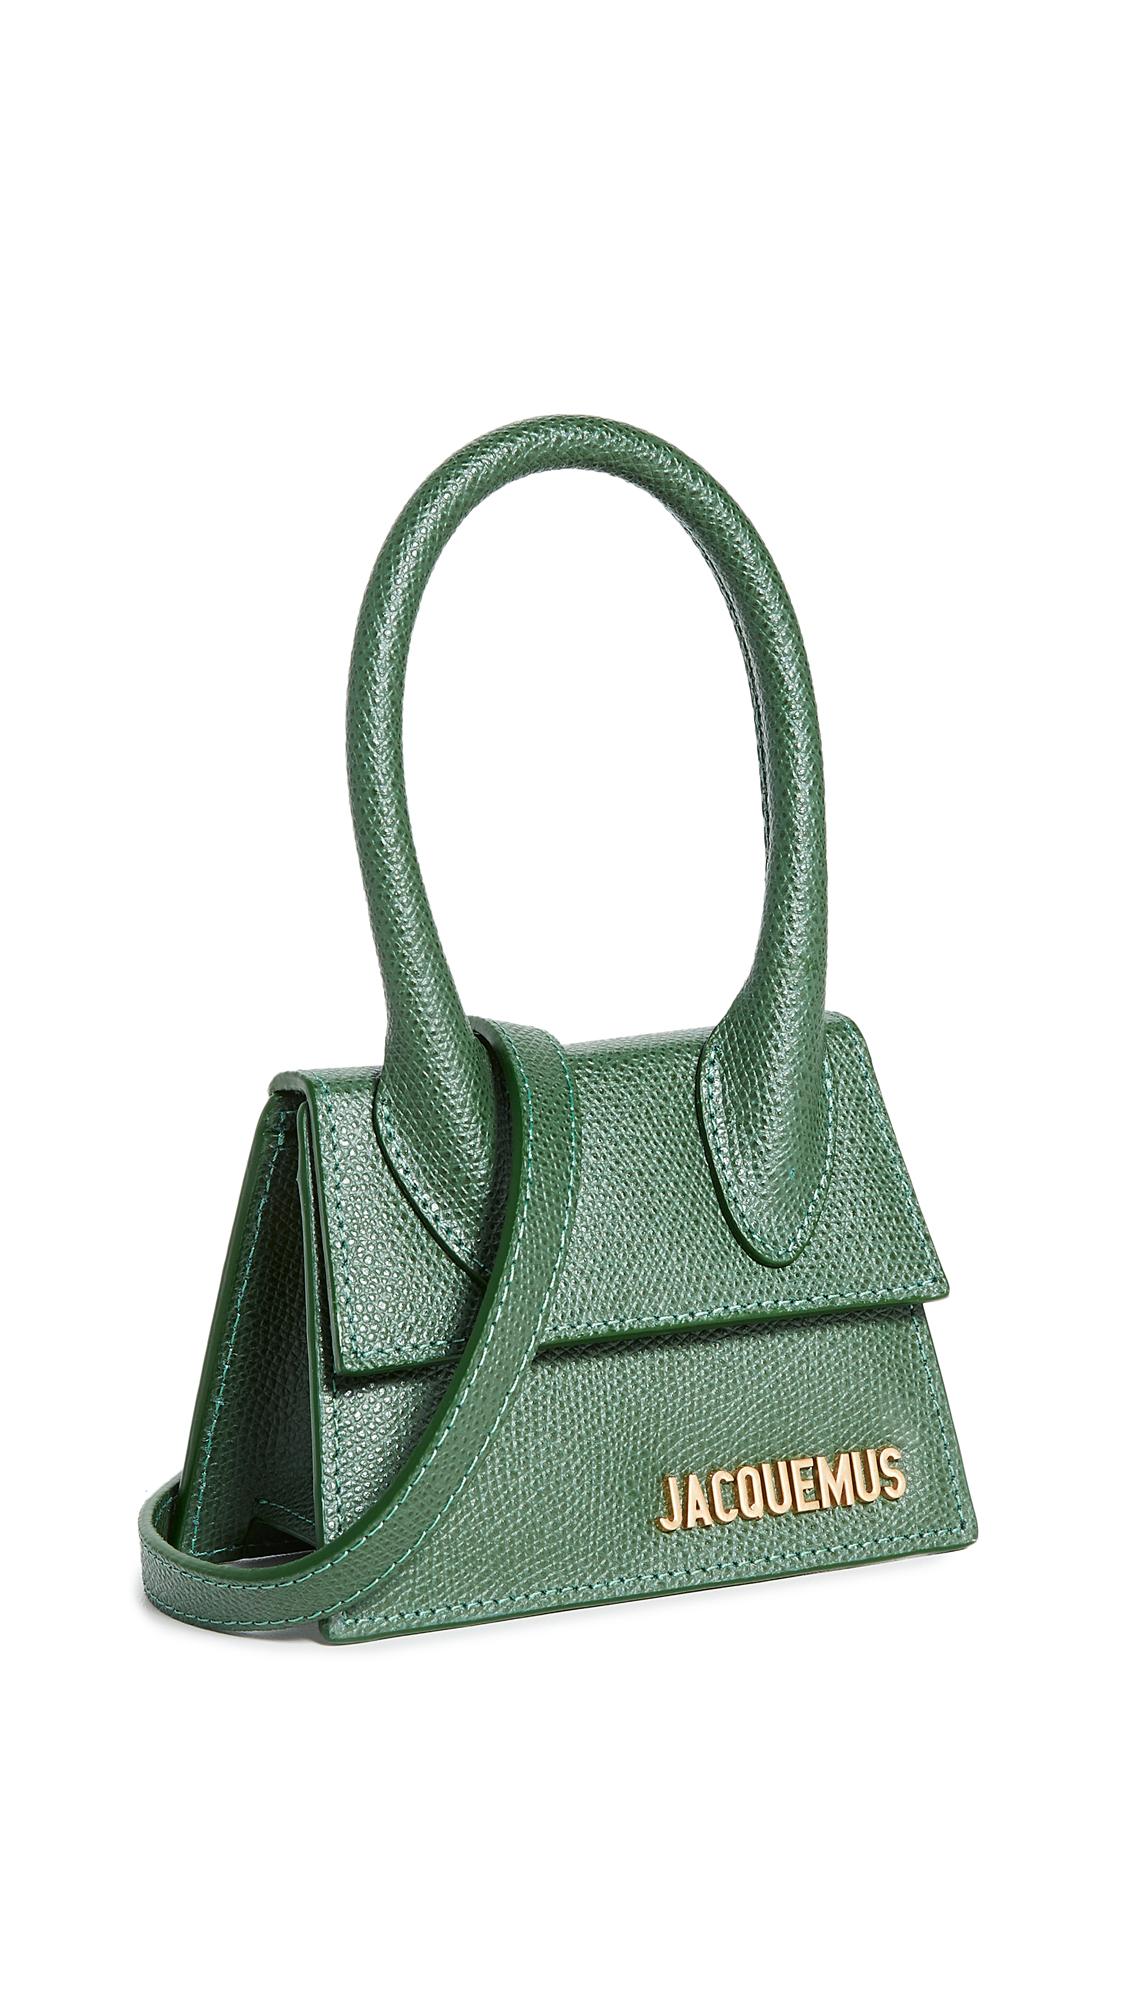 Jacquemus Le Chiquito Micro Bag in Green | Lyst